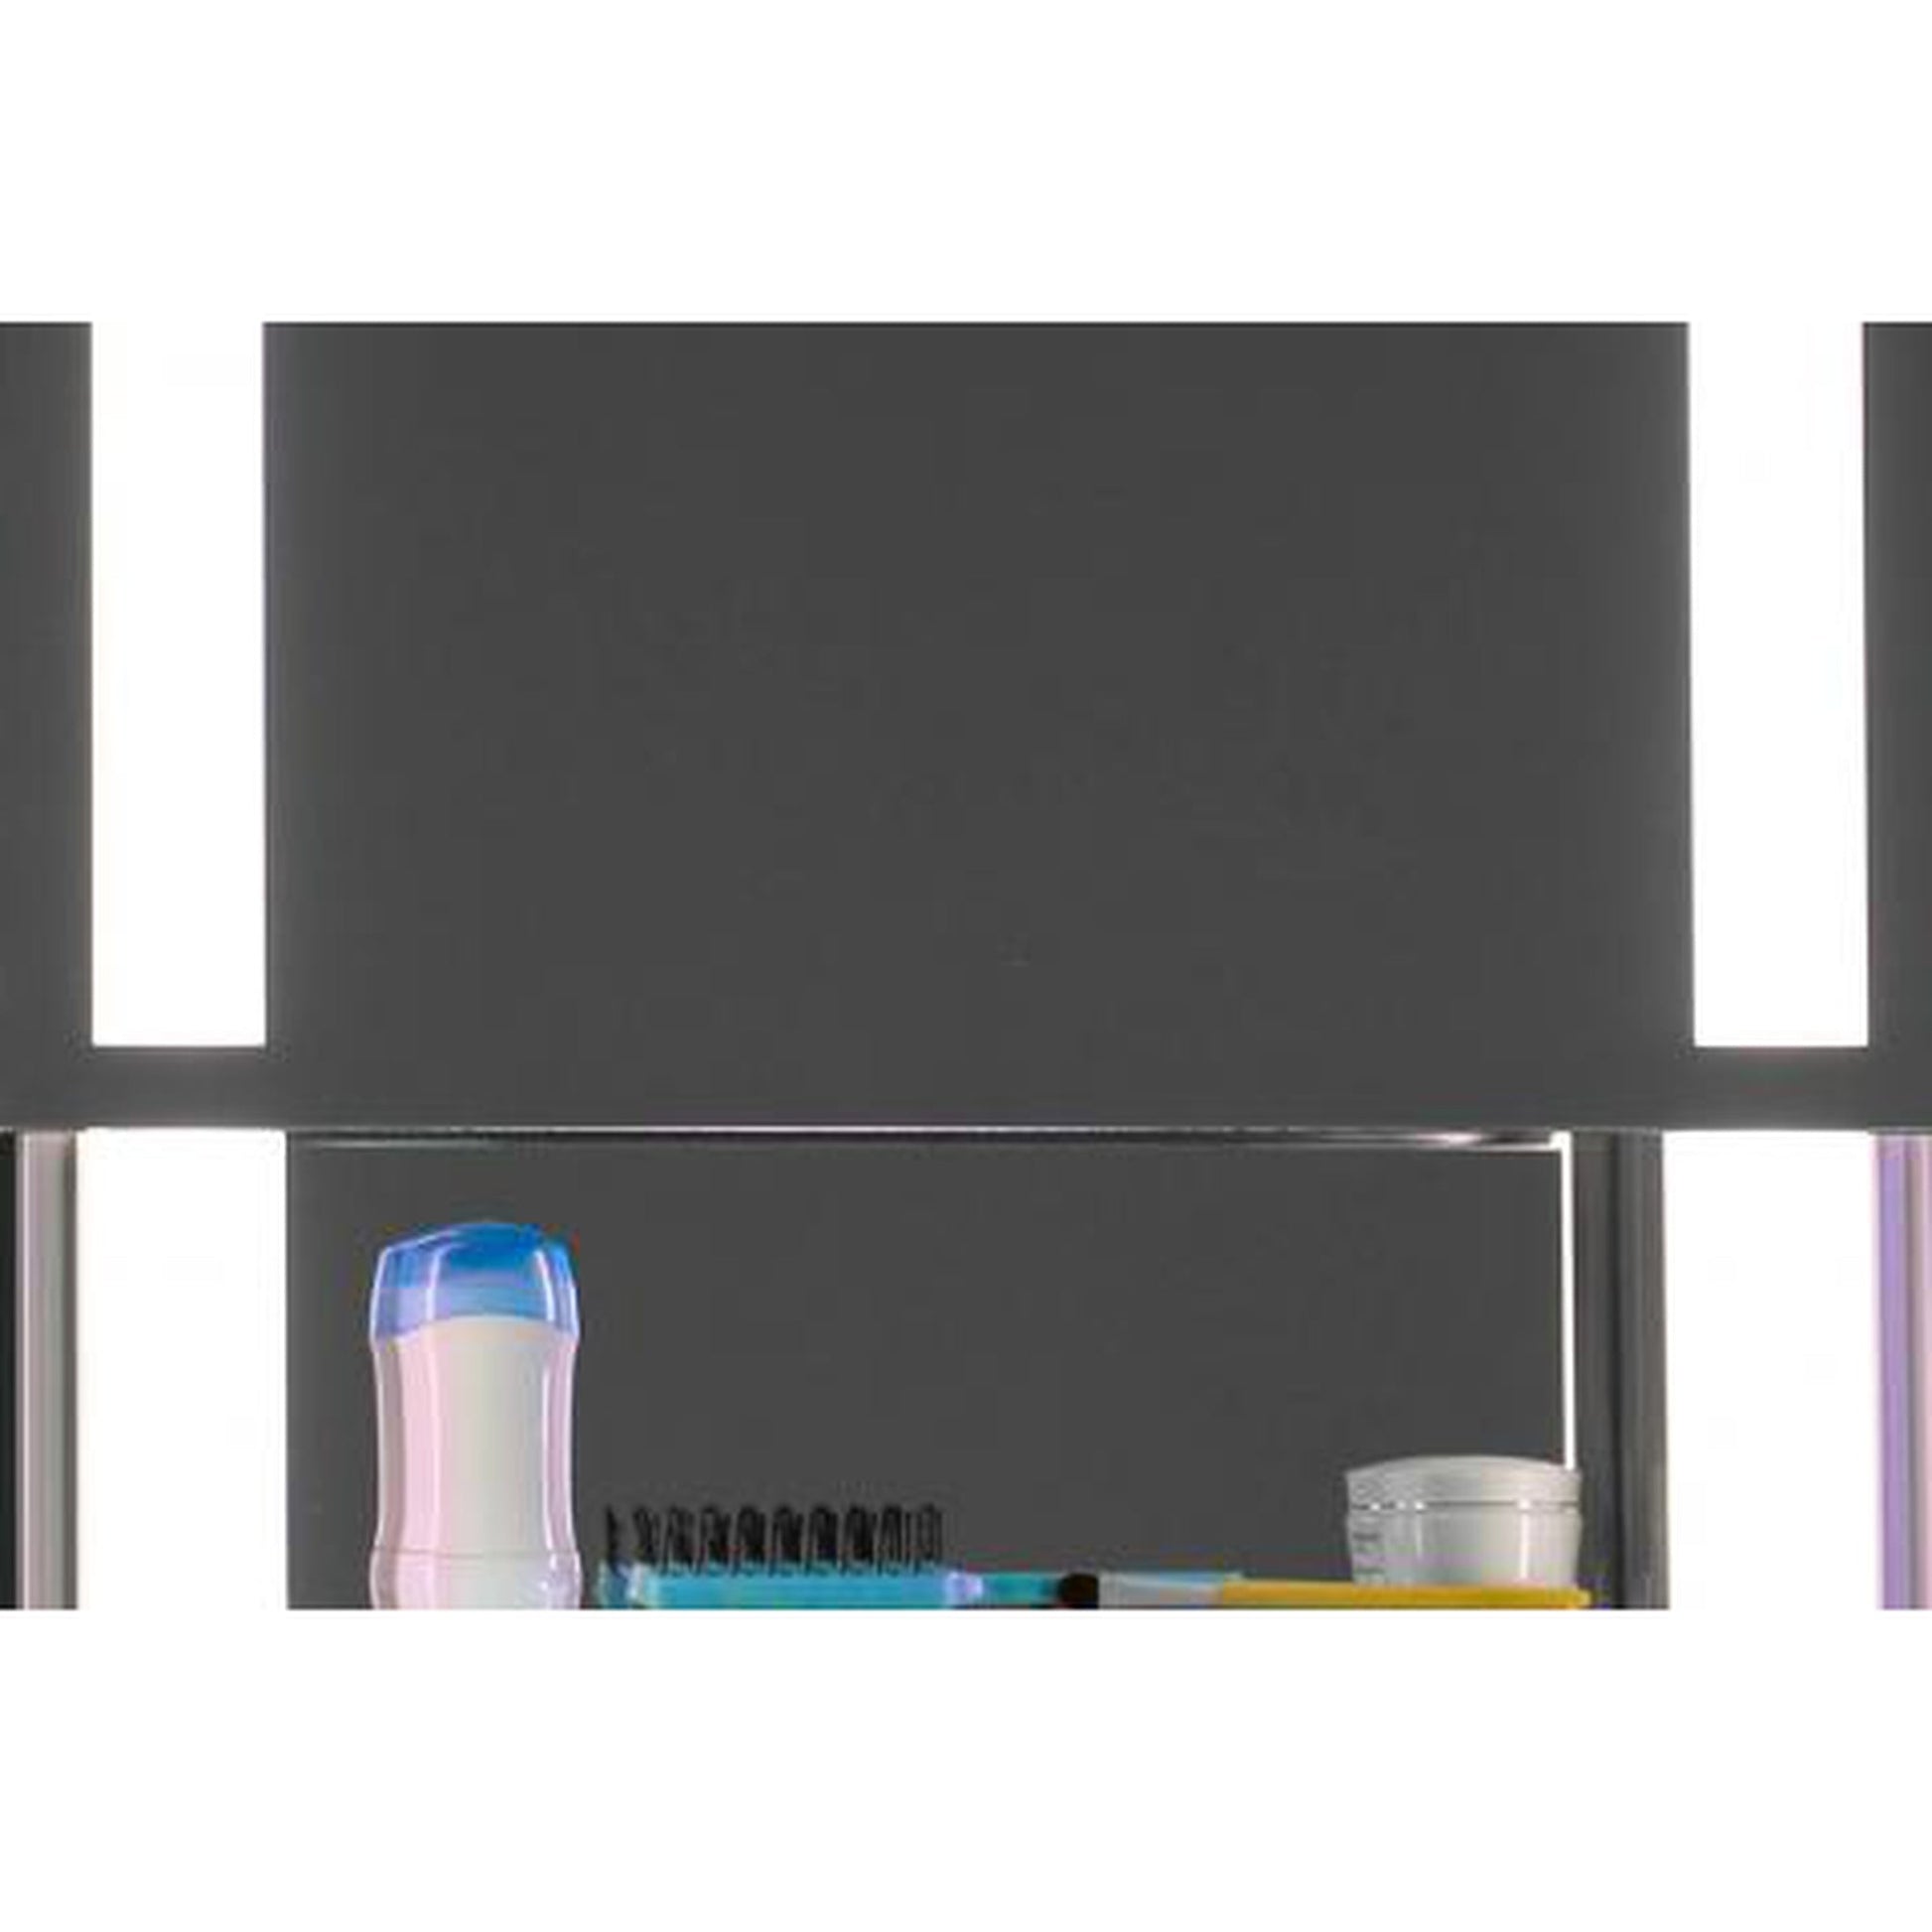 Sidler SideLight 23" x 29" 3000K Single Gliding Mirror Door Anodized Aluminum Medicine Cabinet With Built-in GFCI Outlet and USB port